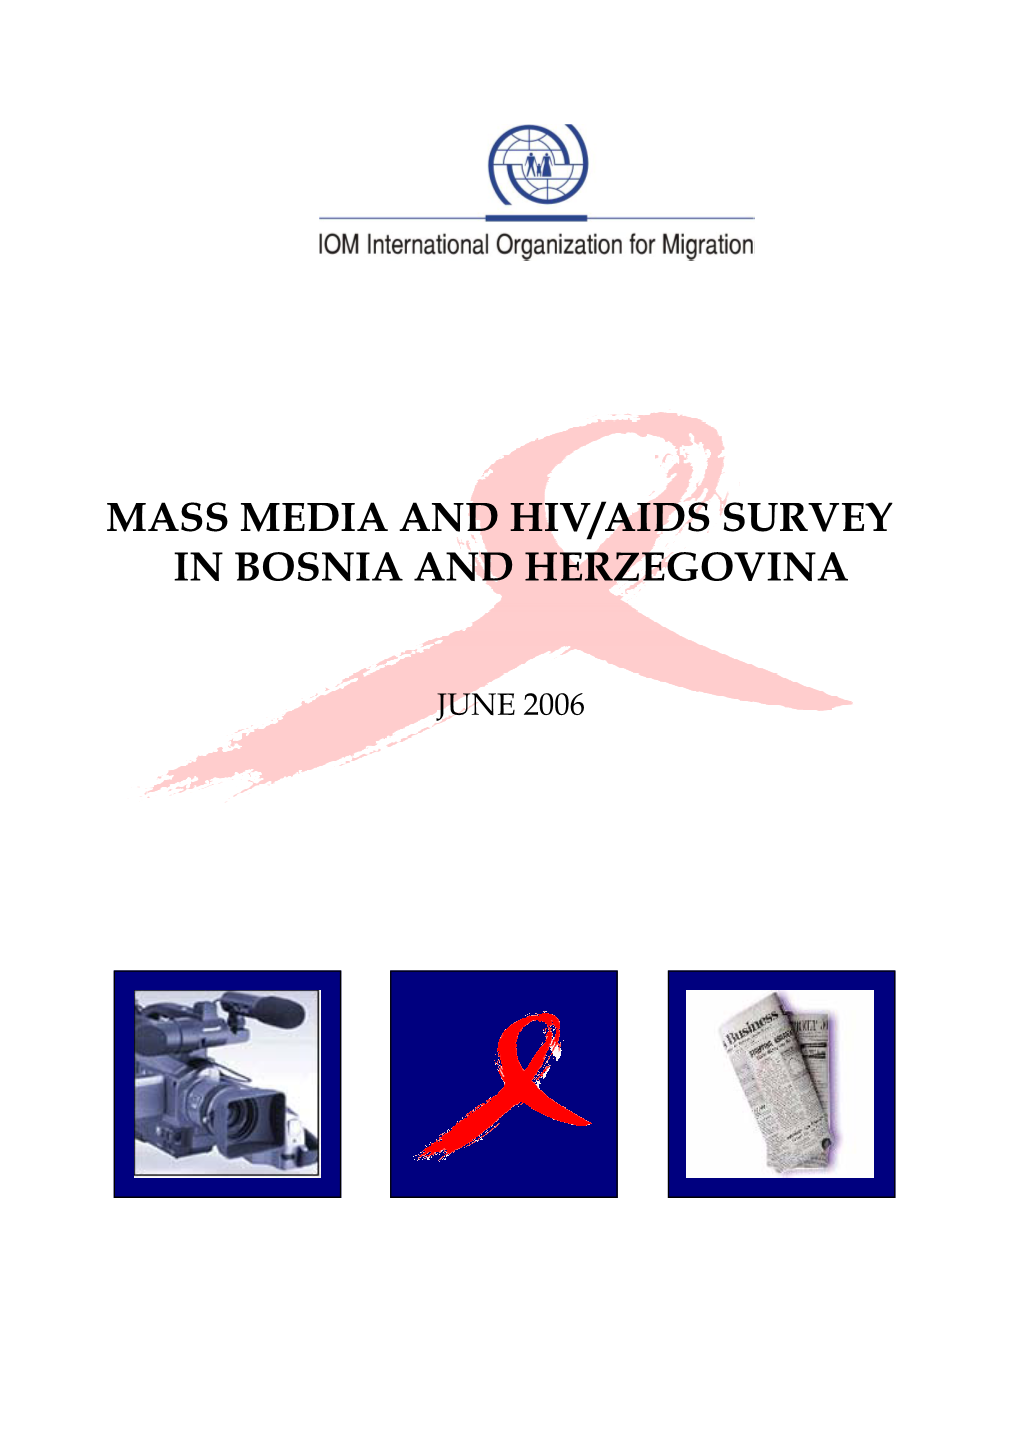 Mass Media and Hiv/Aids Survey in Bosnia and Herzegovina